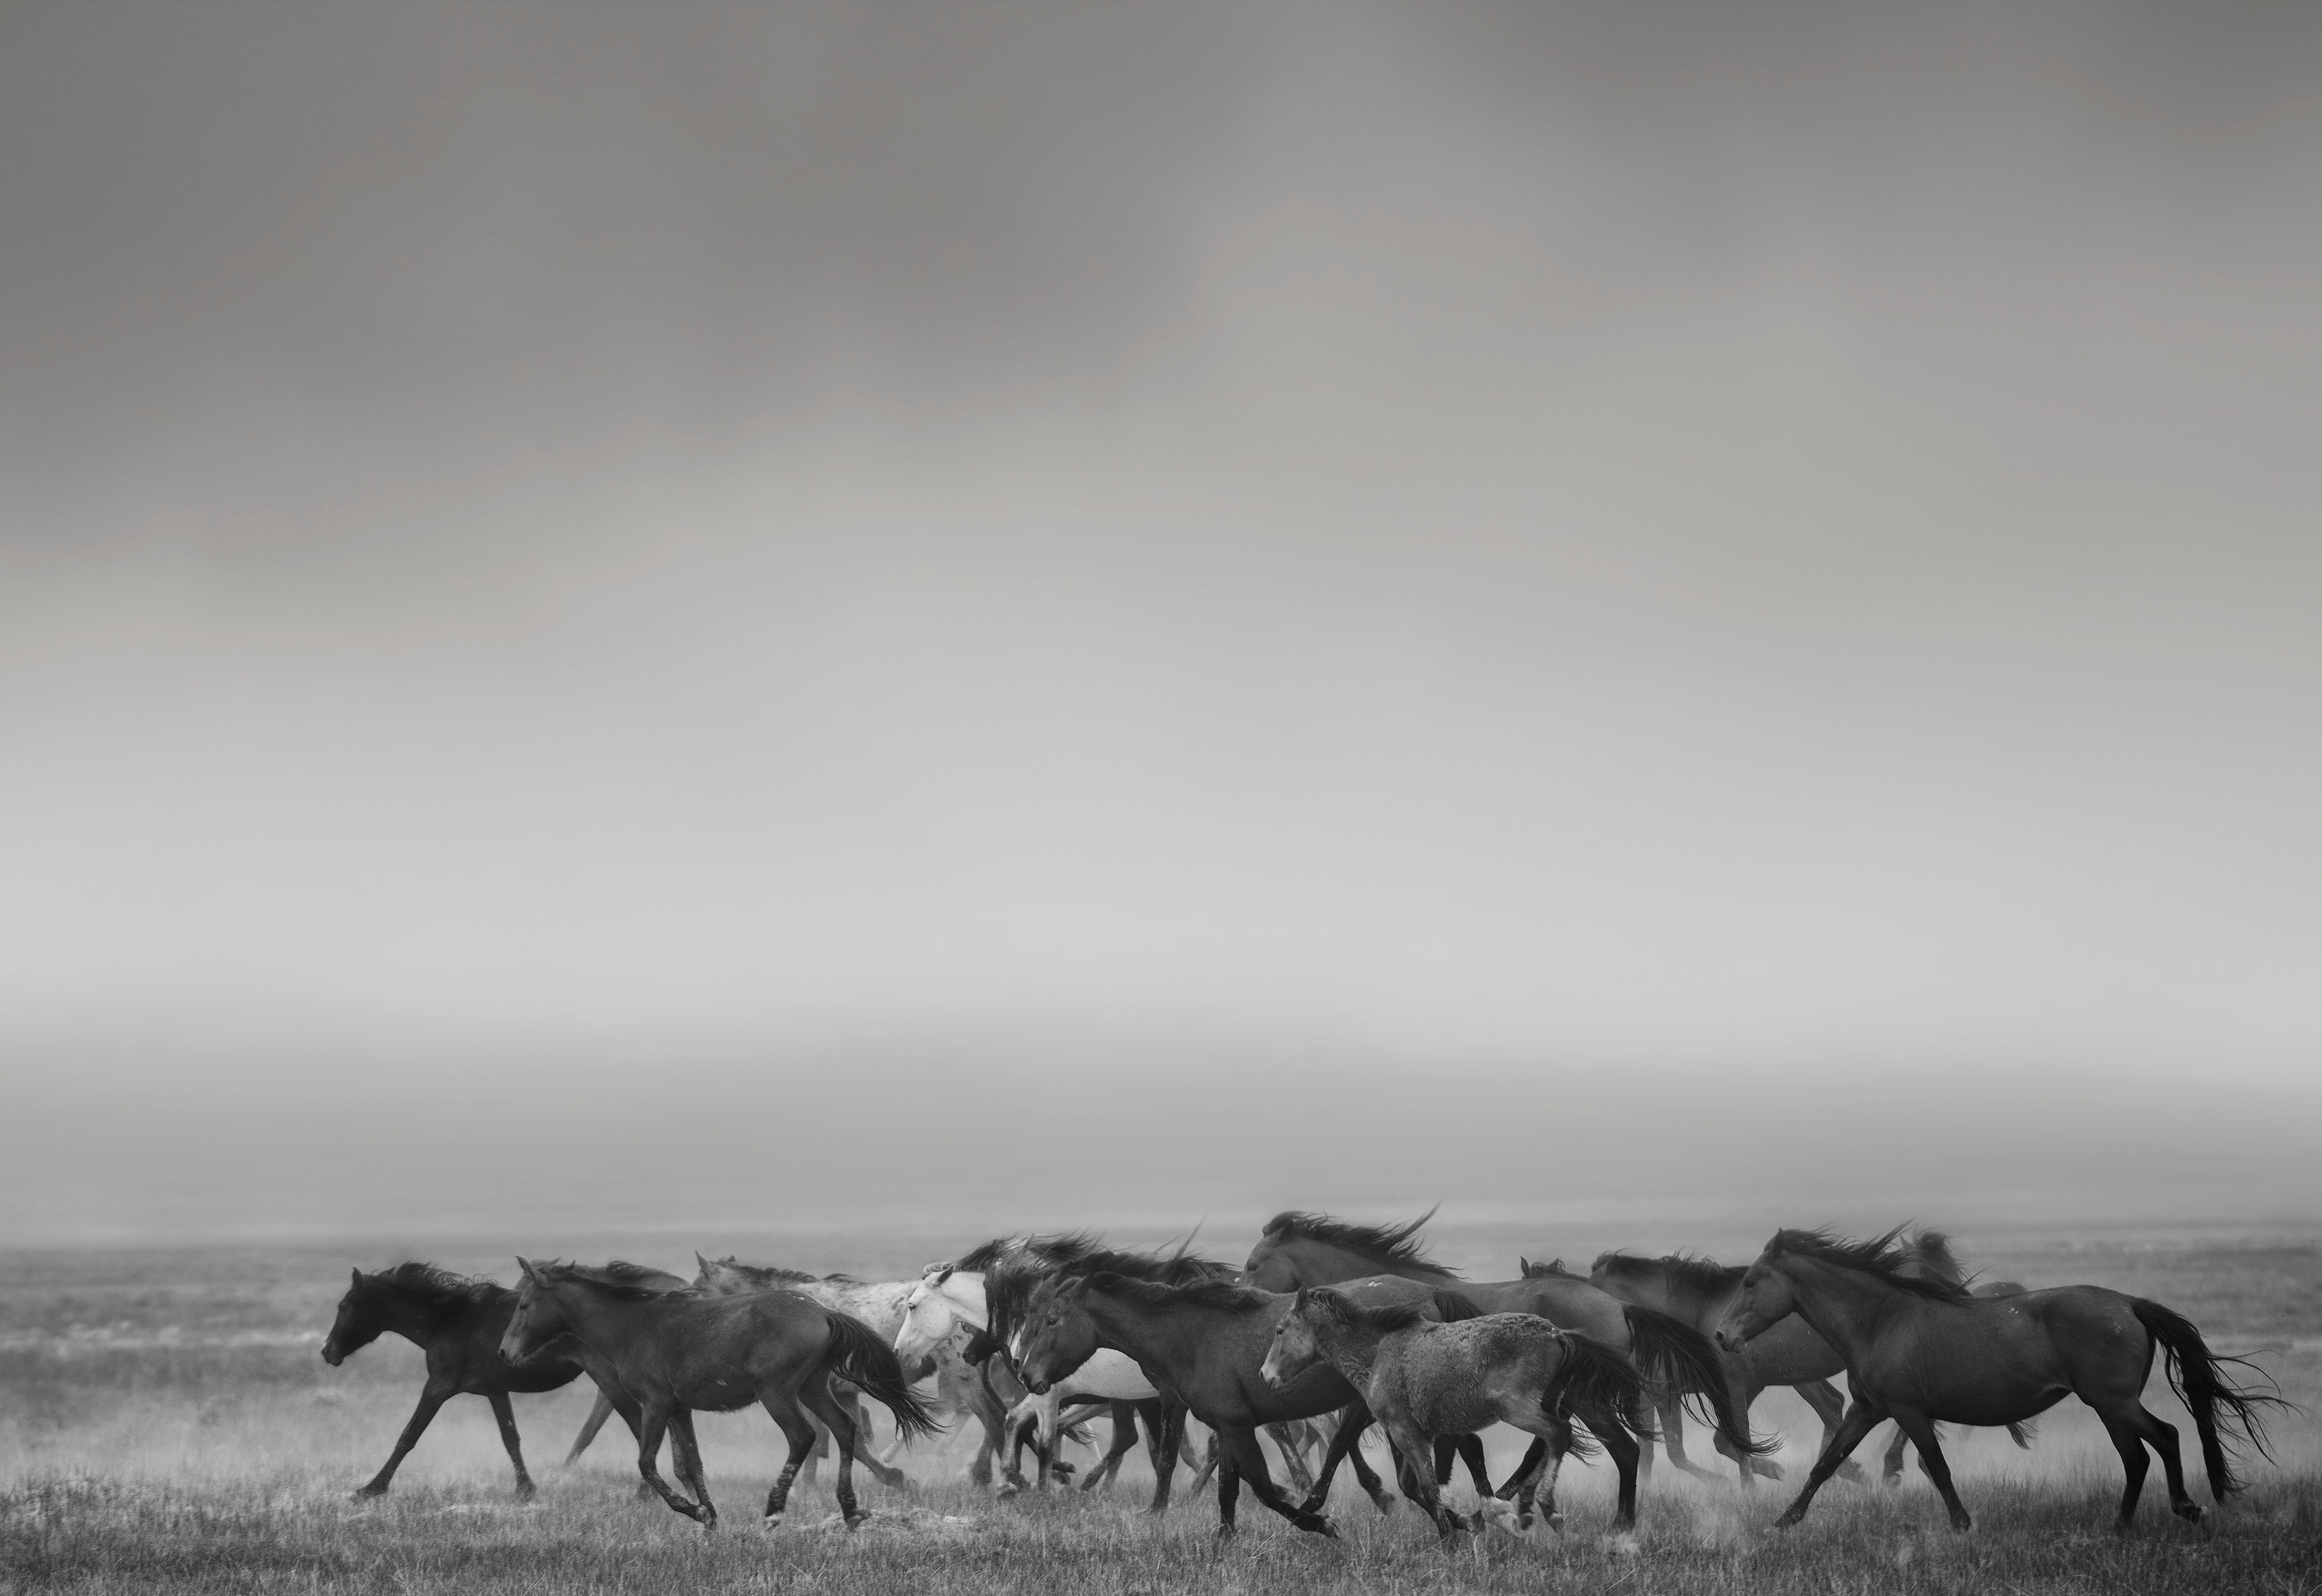 This is a black and white photograph of American Wild Mustangs by Shane Russeck. 
Printed on Archival Paper Using Archival ink

 Shane Russeck has built a reputation for capturing America's landscapes, cultures and endangered animals. Born in